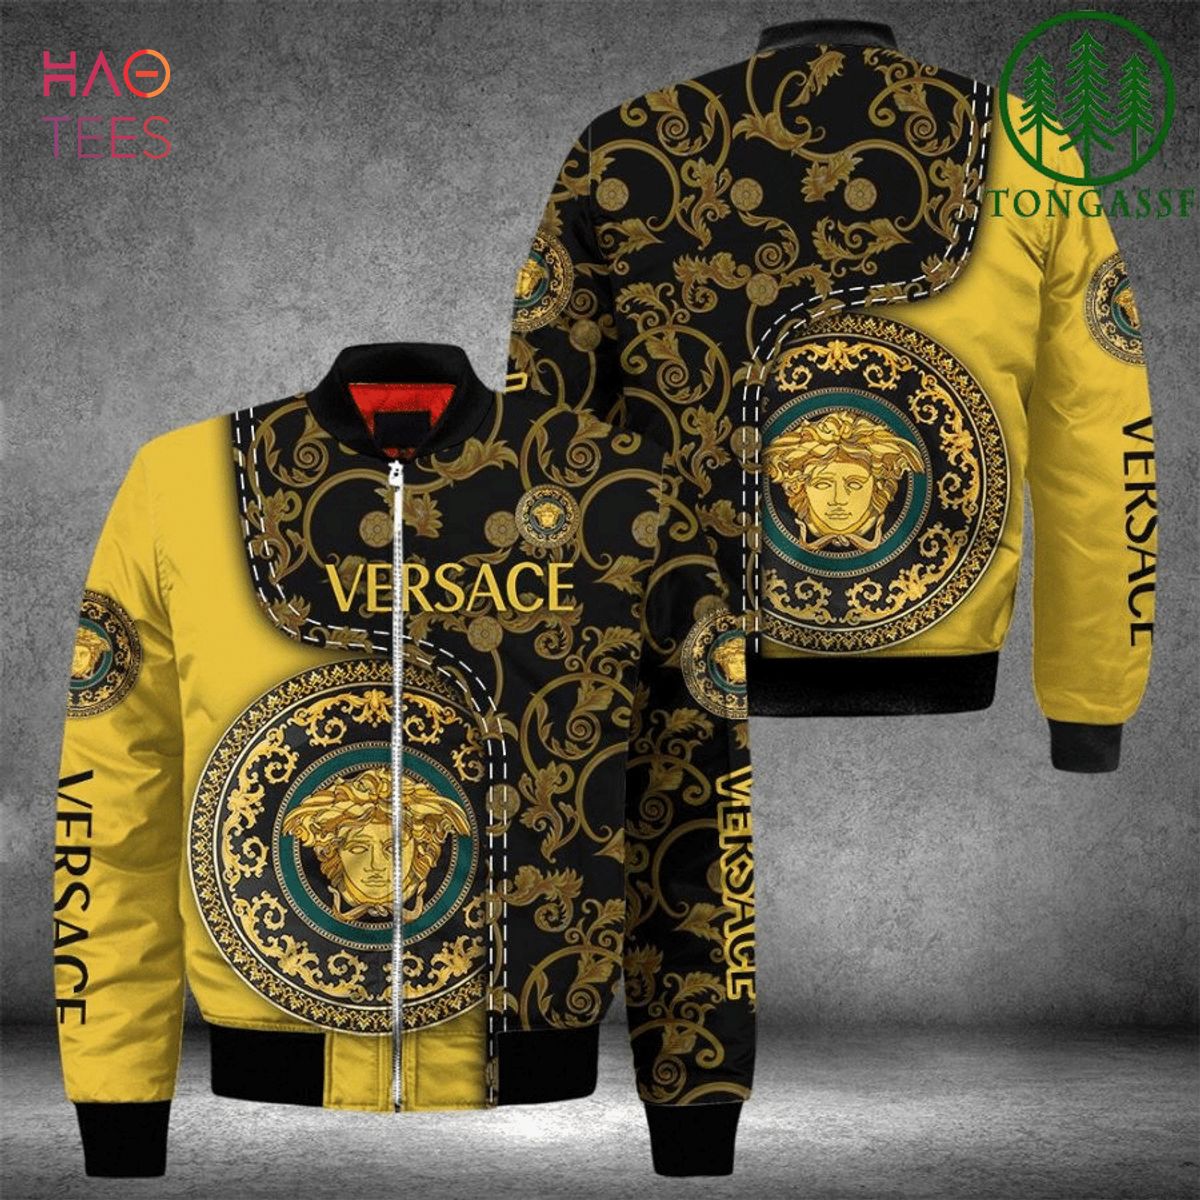 HOT Versace Luxury Brand Black Mix Gold Bomber Jacket Limited Edition